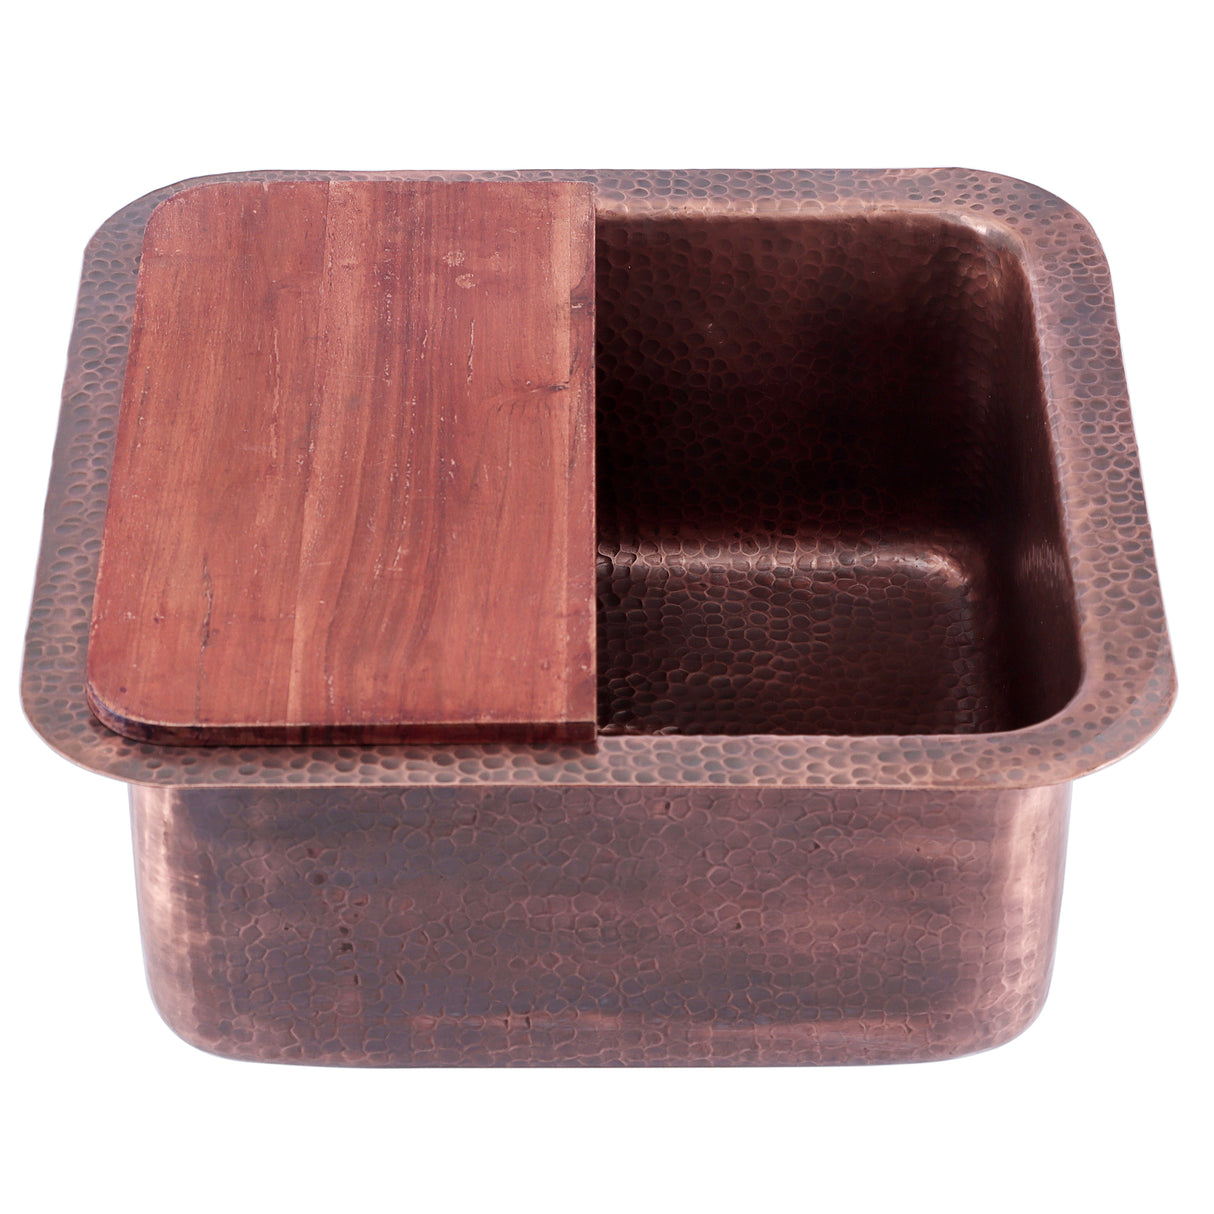 Nantucket Sinks' SQRC-7PS 16.625 Inch Copper Square Dualrmount Bar Sink and Cutting Board